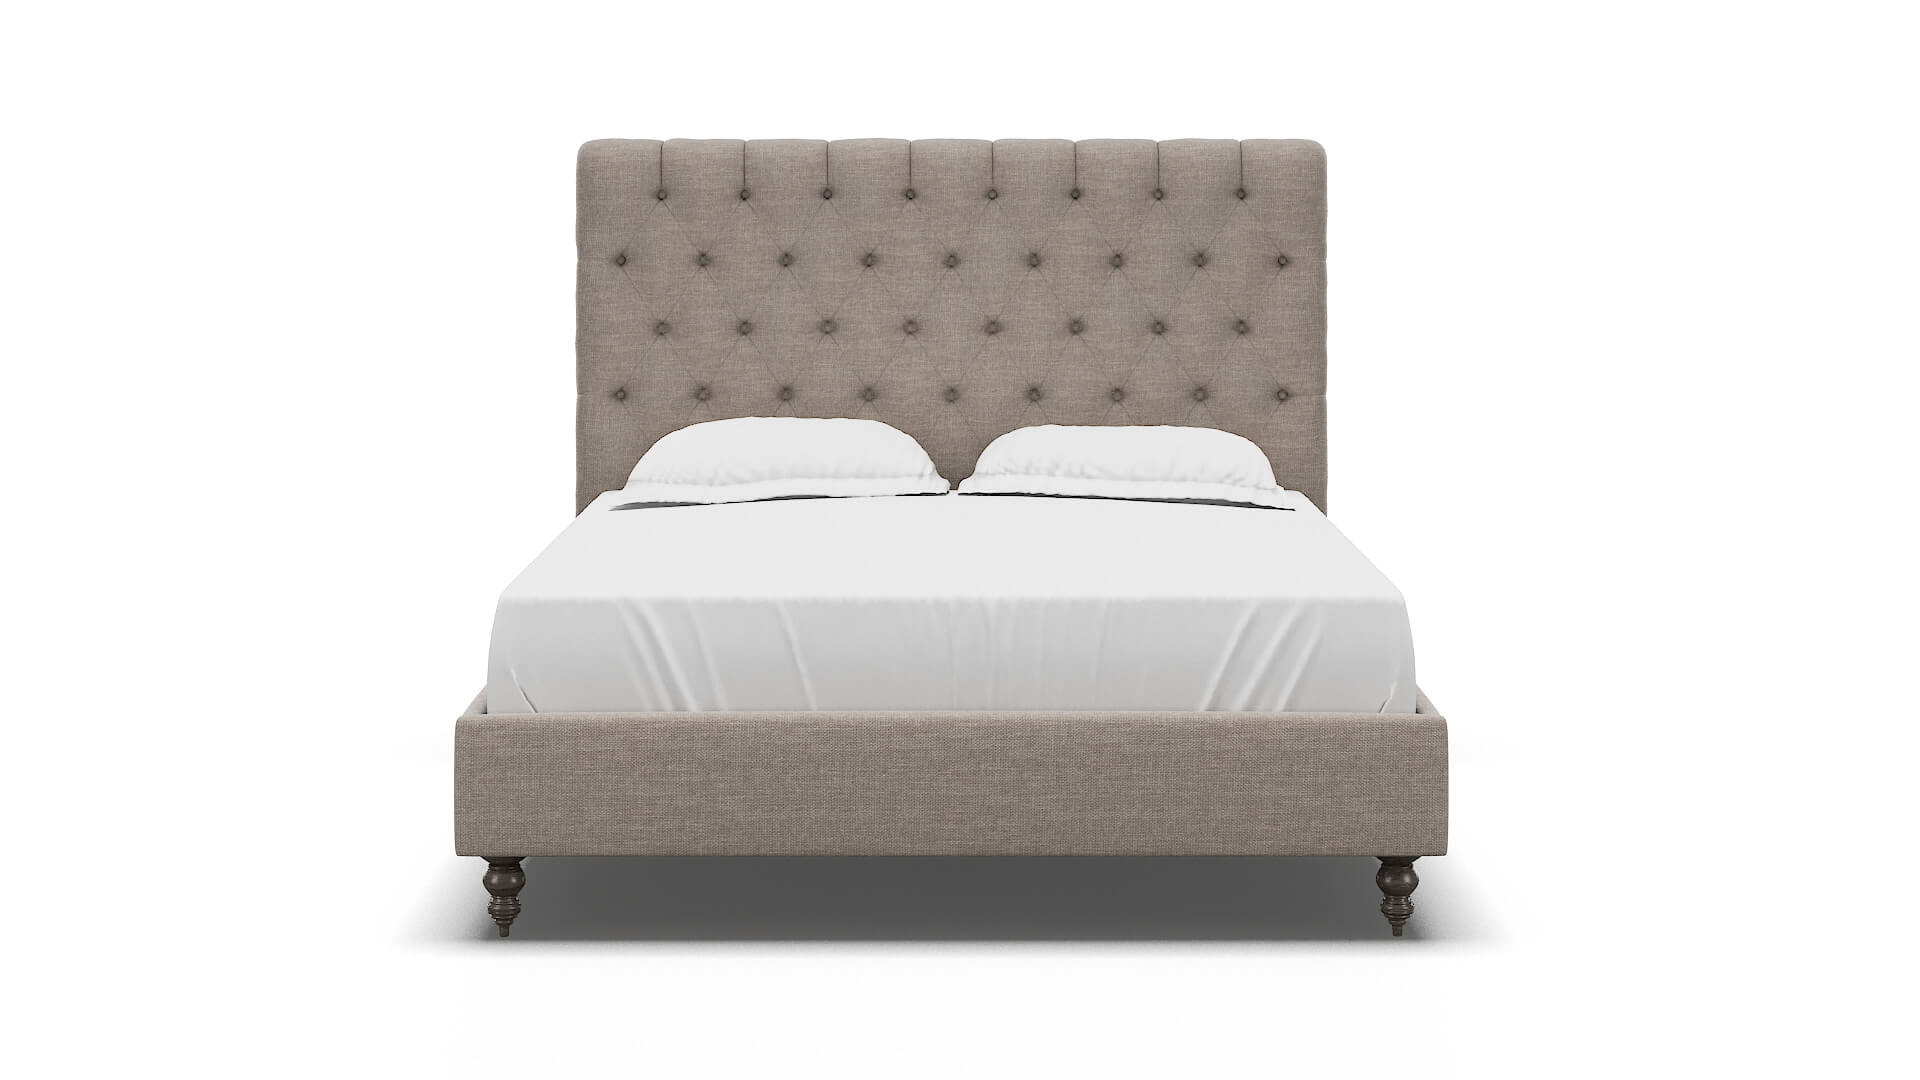 Remy Clyde Dolphin Bed espresso legs 1